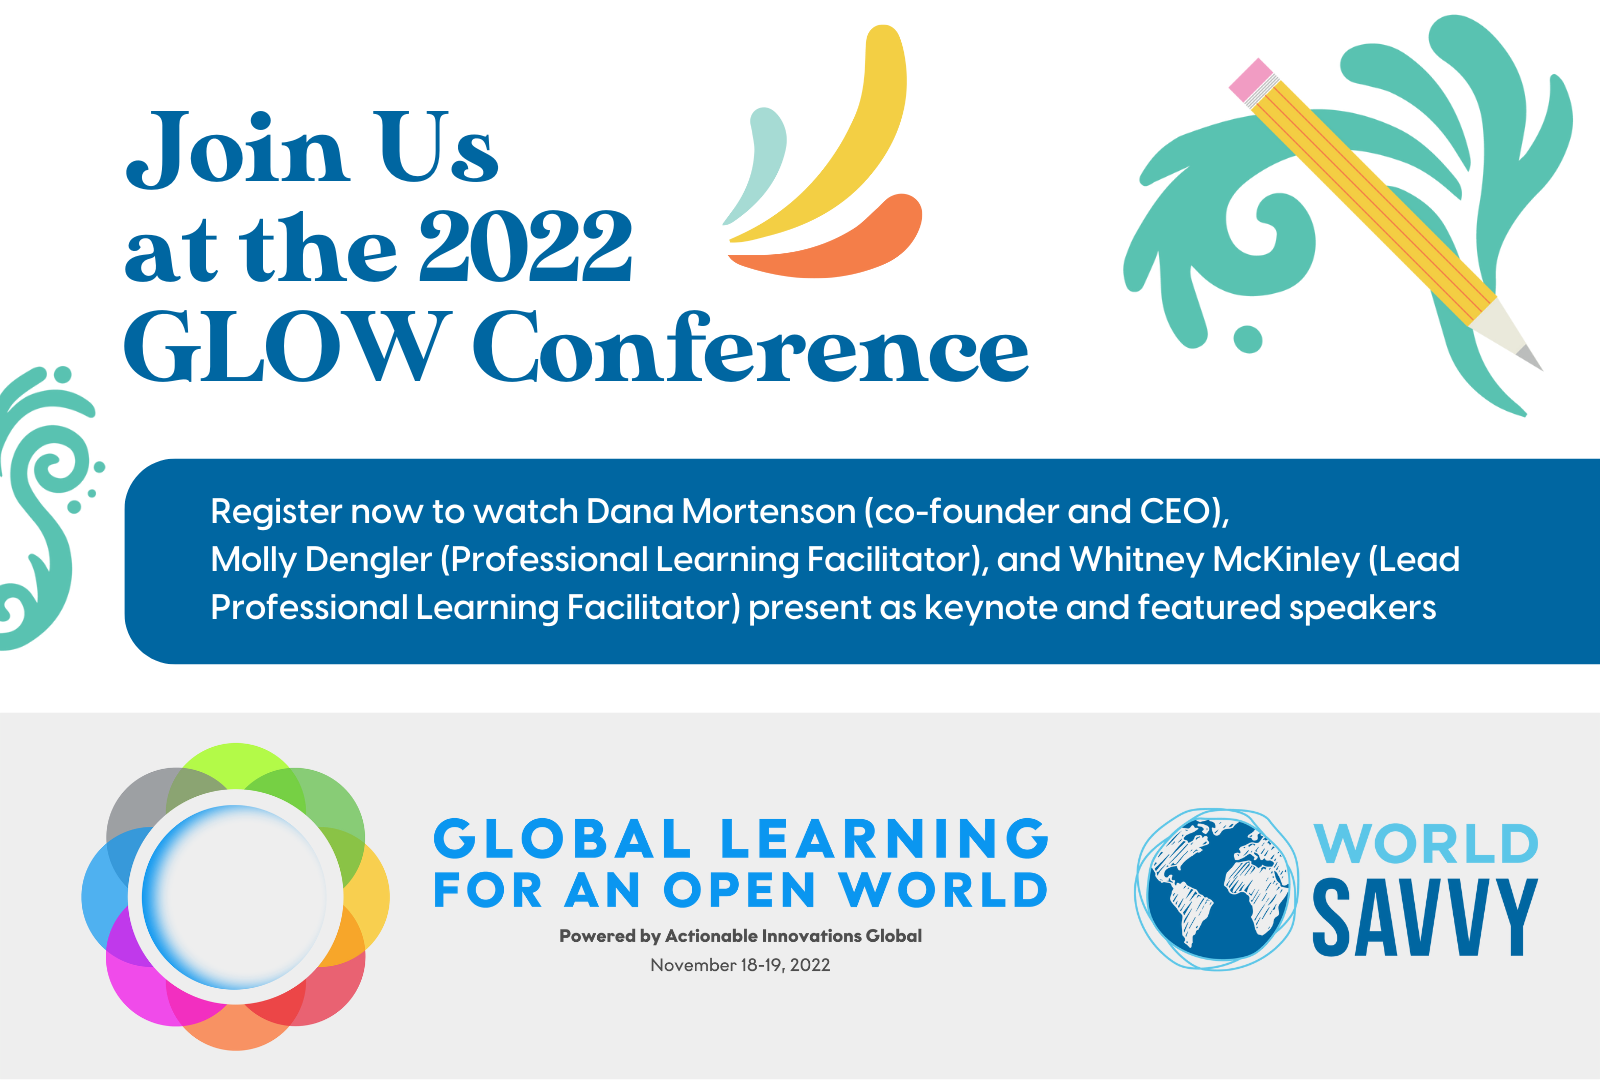 World Savvy featured as Premier Partner of GLOW Conference; Dana Mortenson to deliver keynote address.